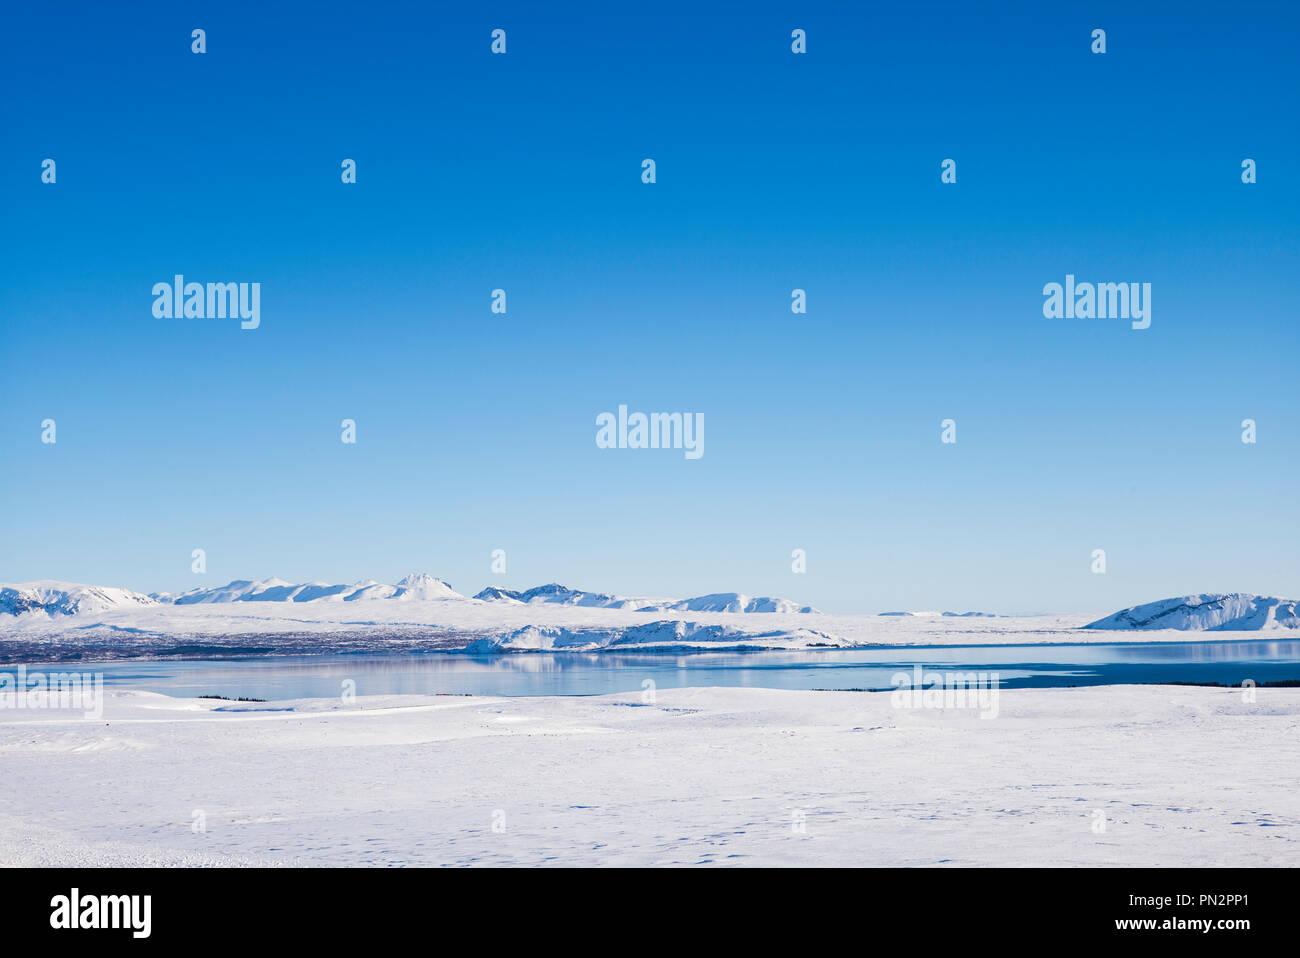 Snow-covered mountains and lake in stunning glacial landscape in South Iceland Stock Photo